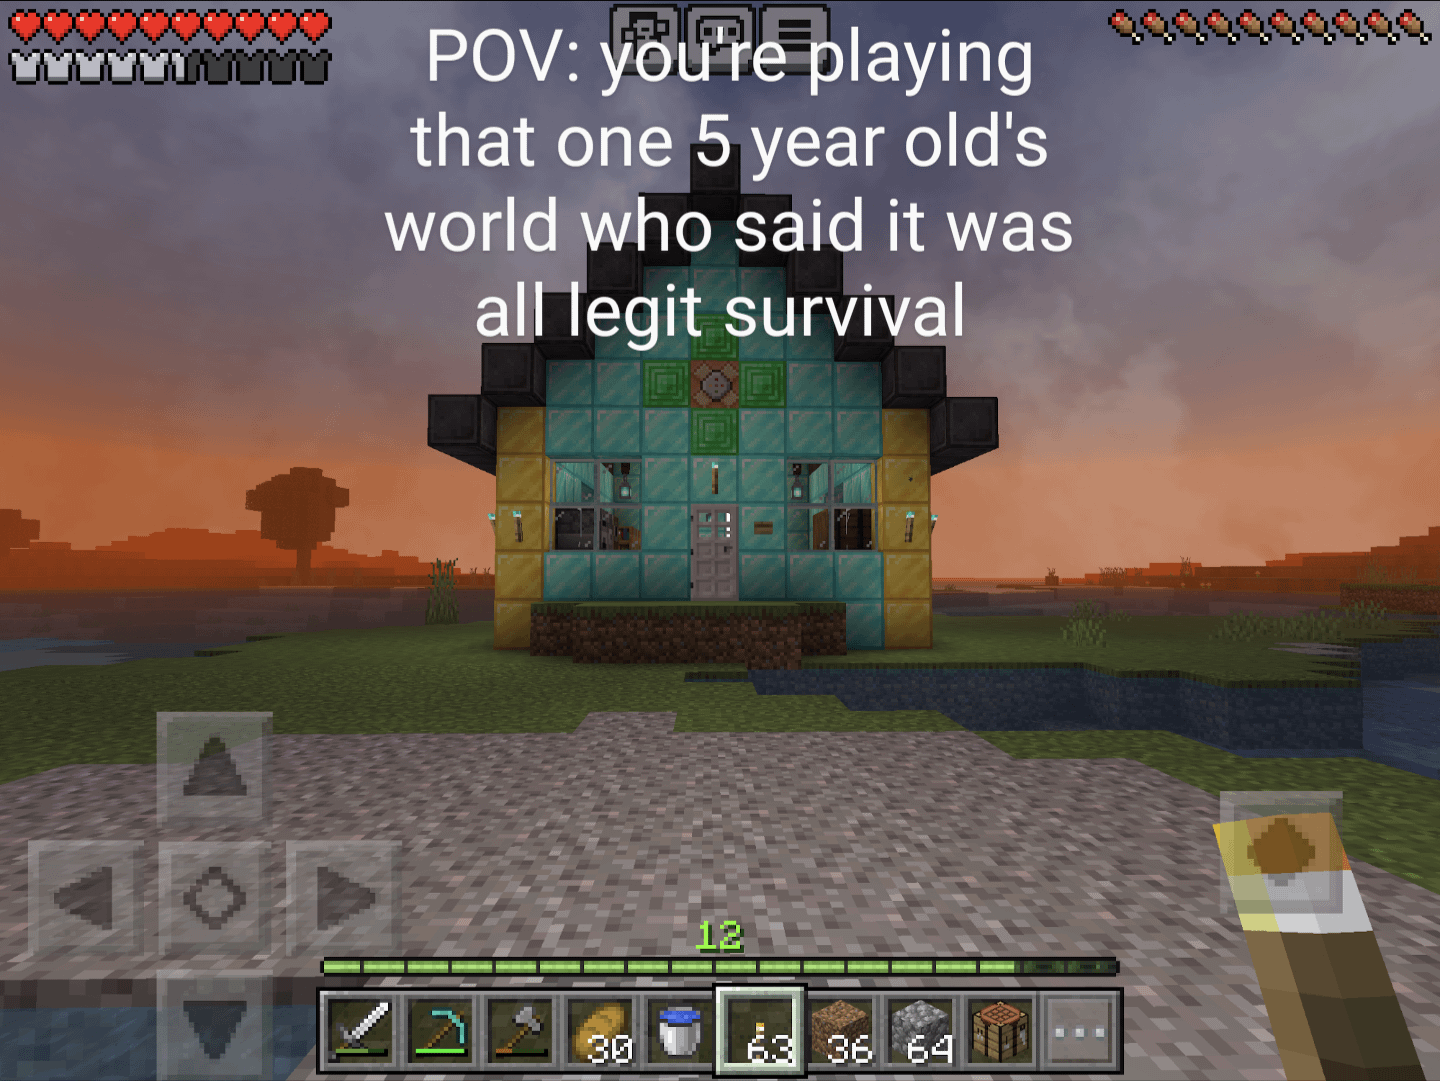 Minecraft Memes - "Surviving in a 5-year-old's world"